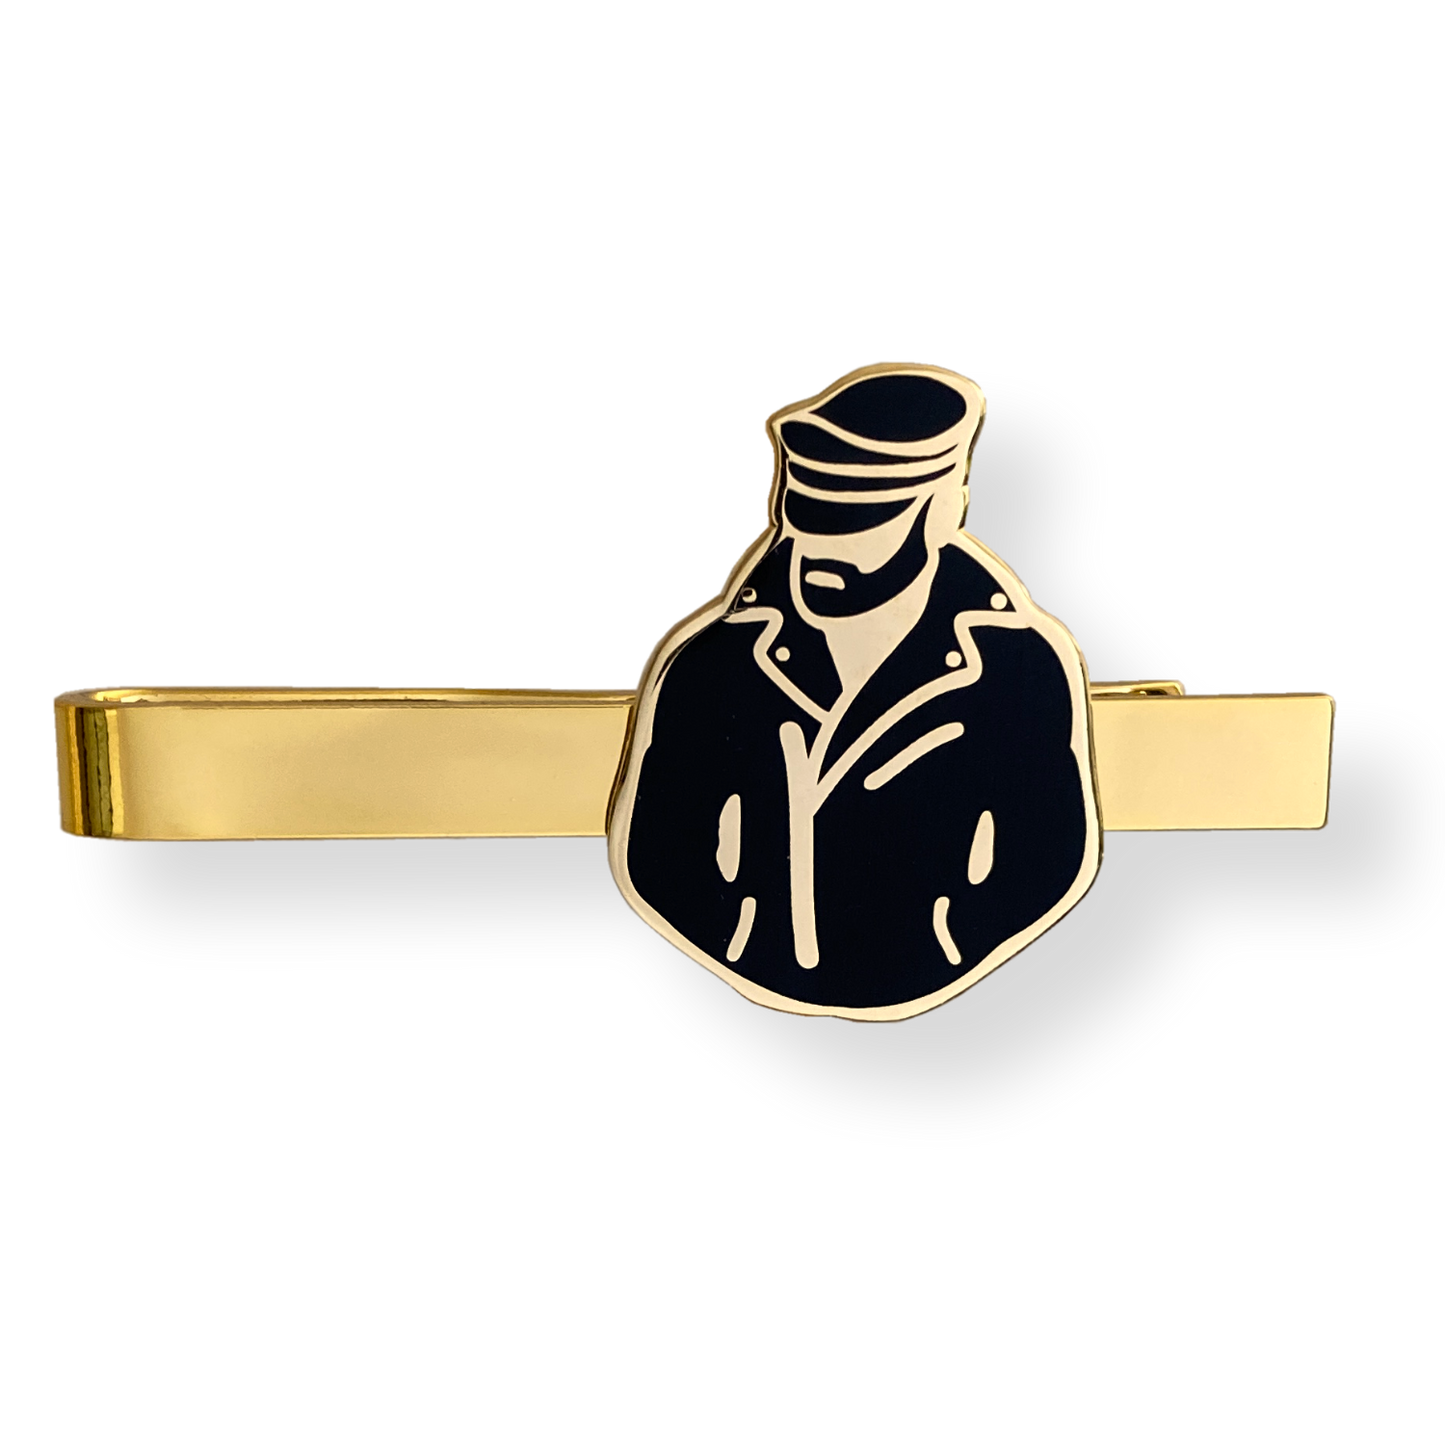 Master of the House Tie Clip "Biker" Gold